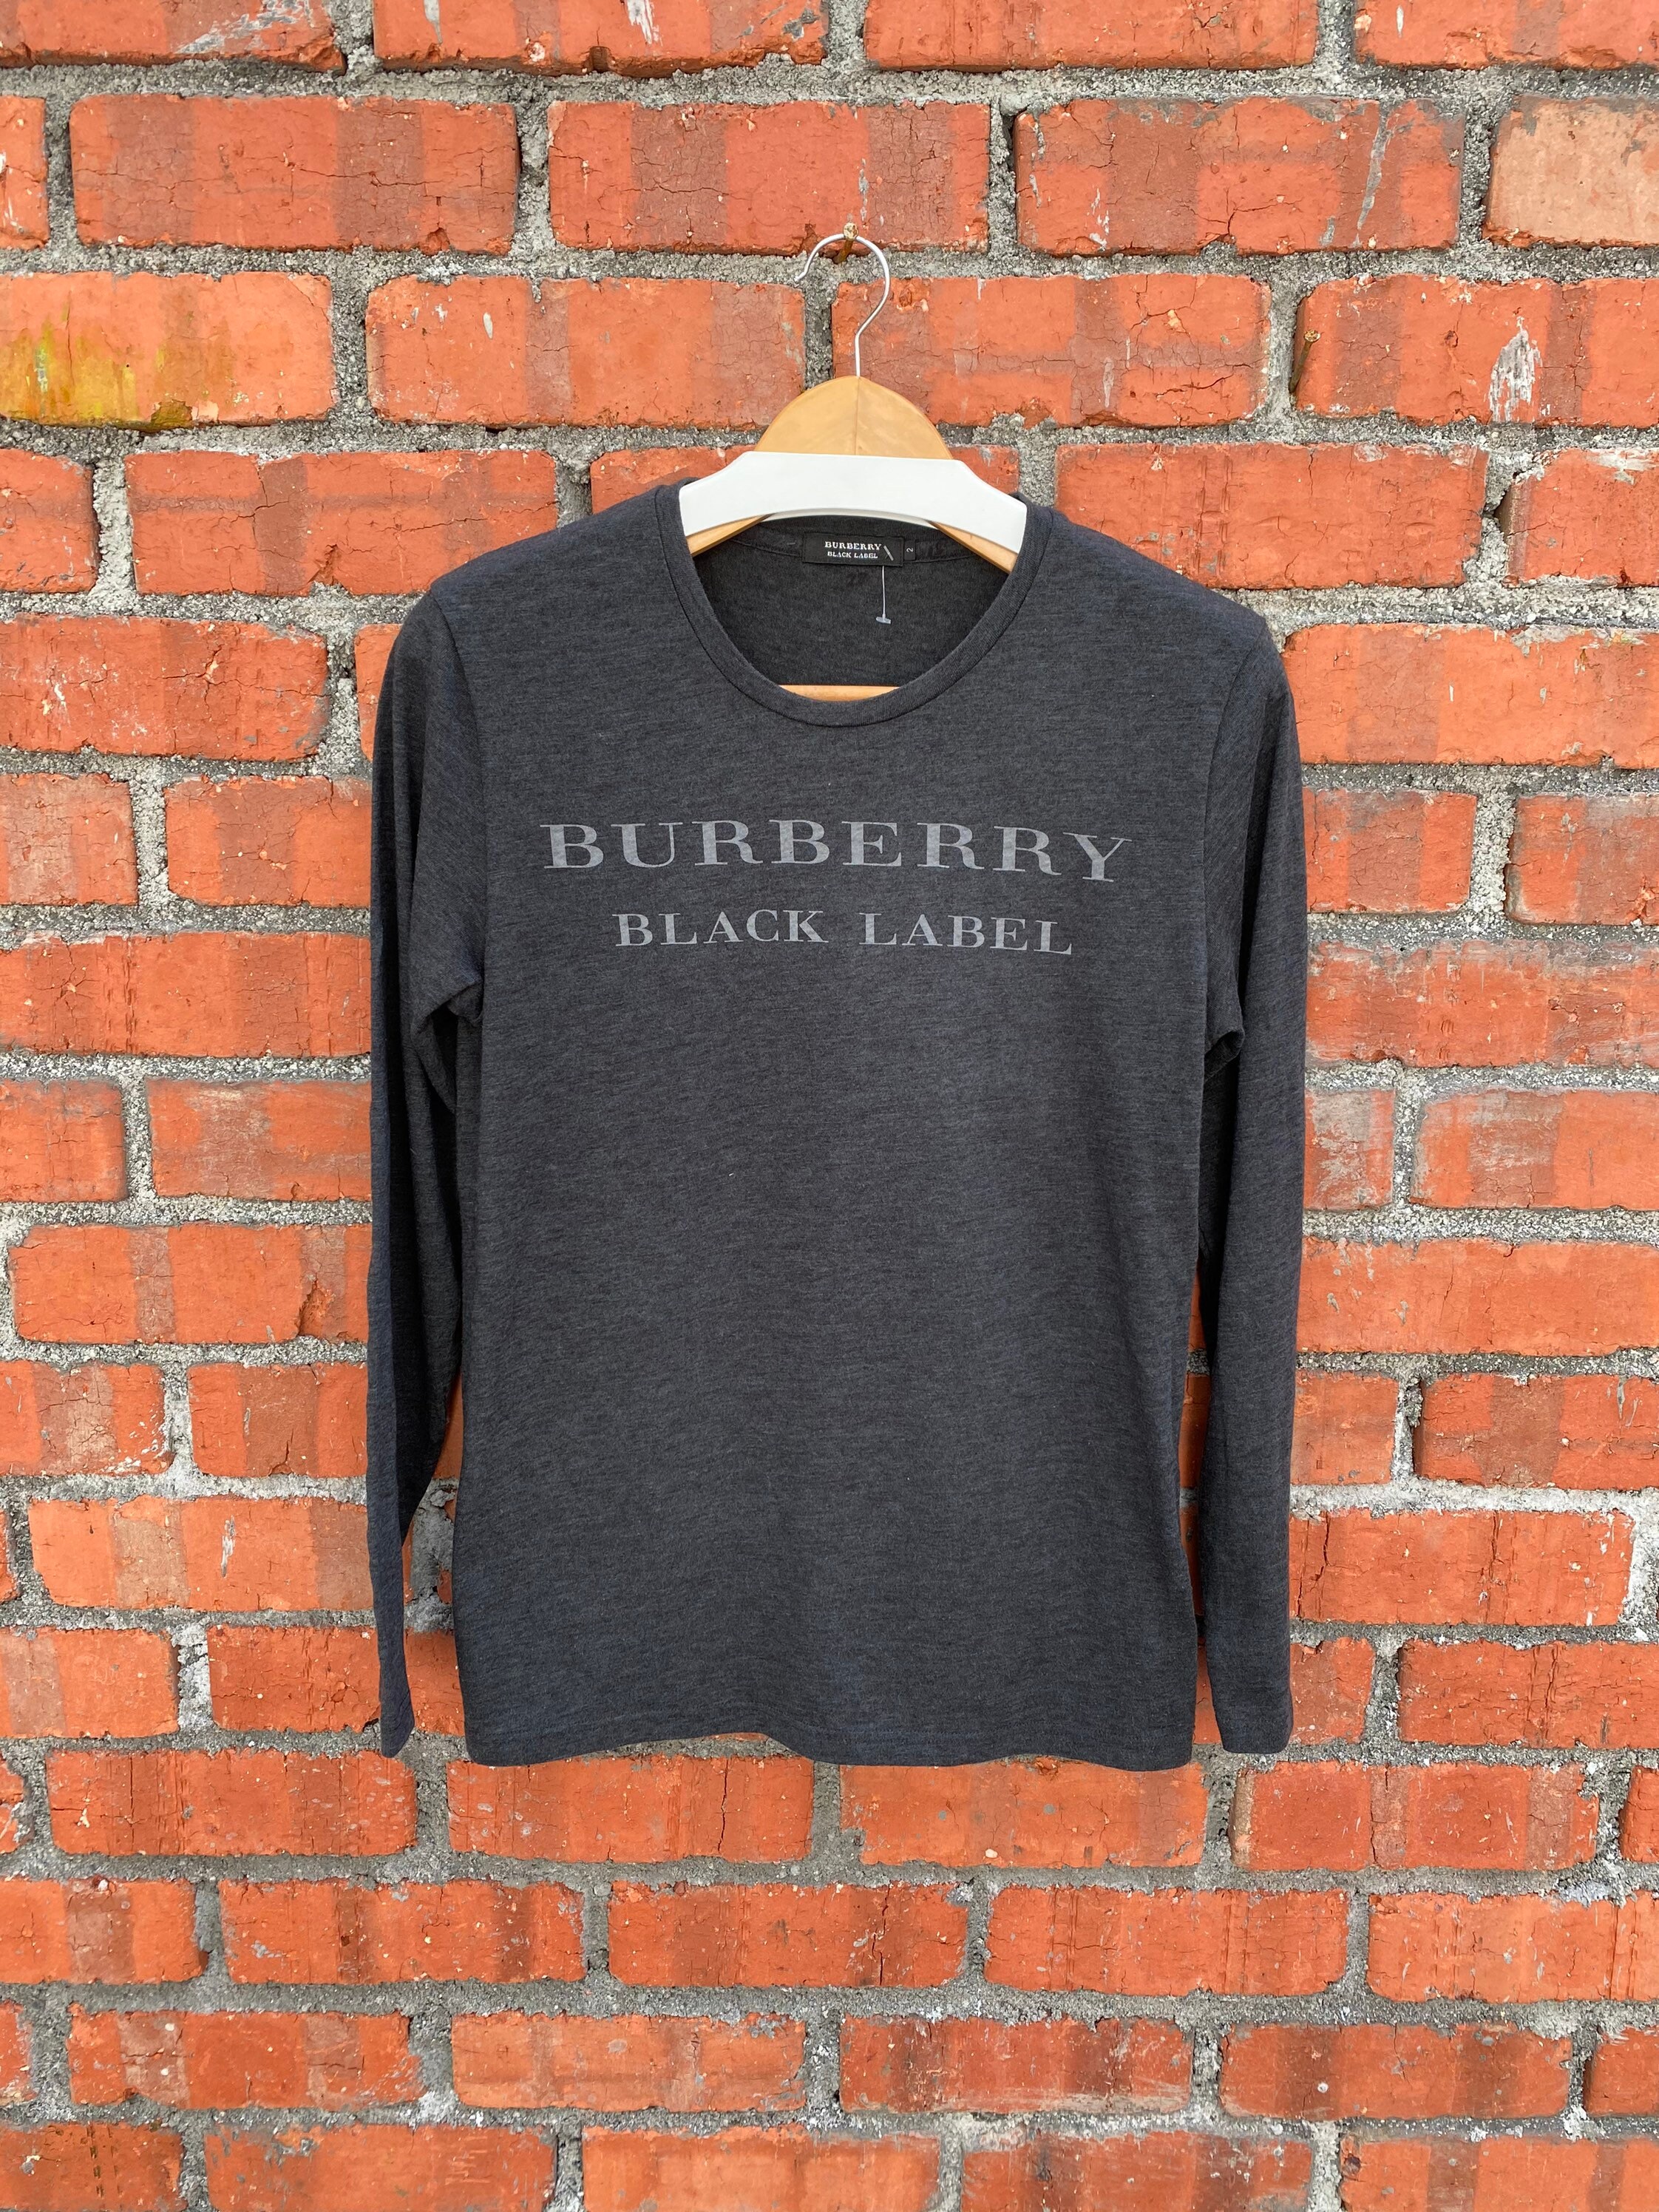 Burberry Black Label Made in Japan - Etsy Canada